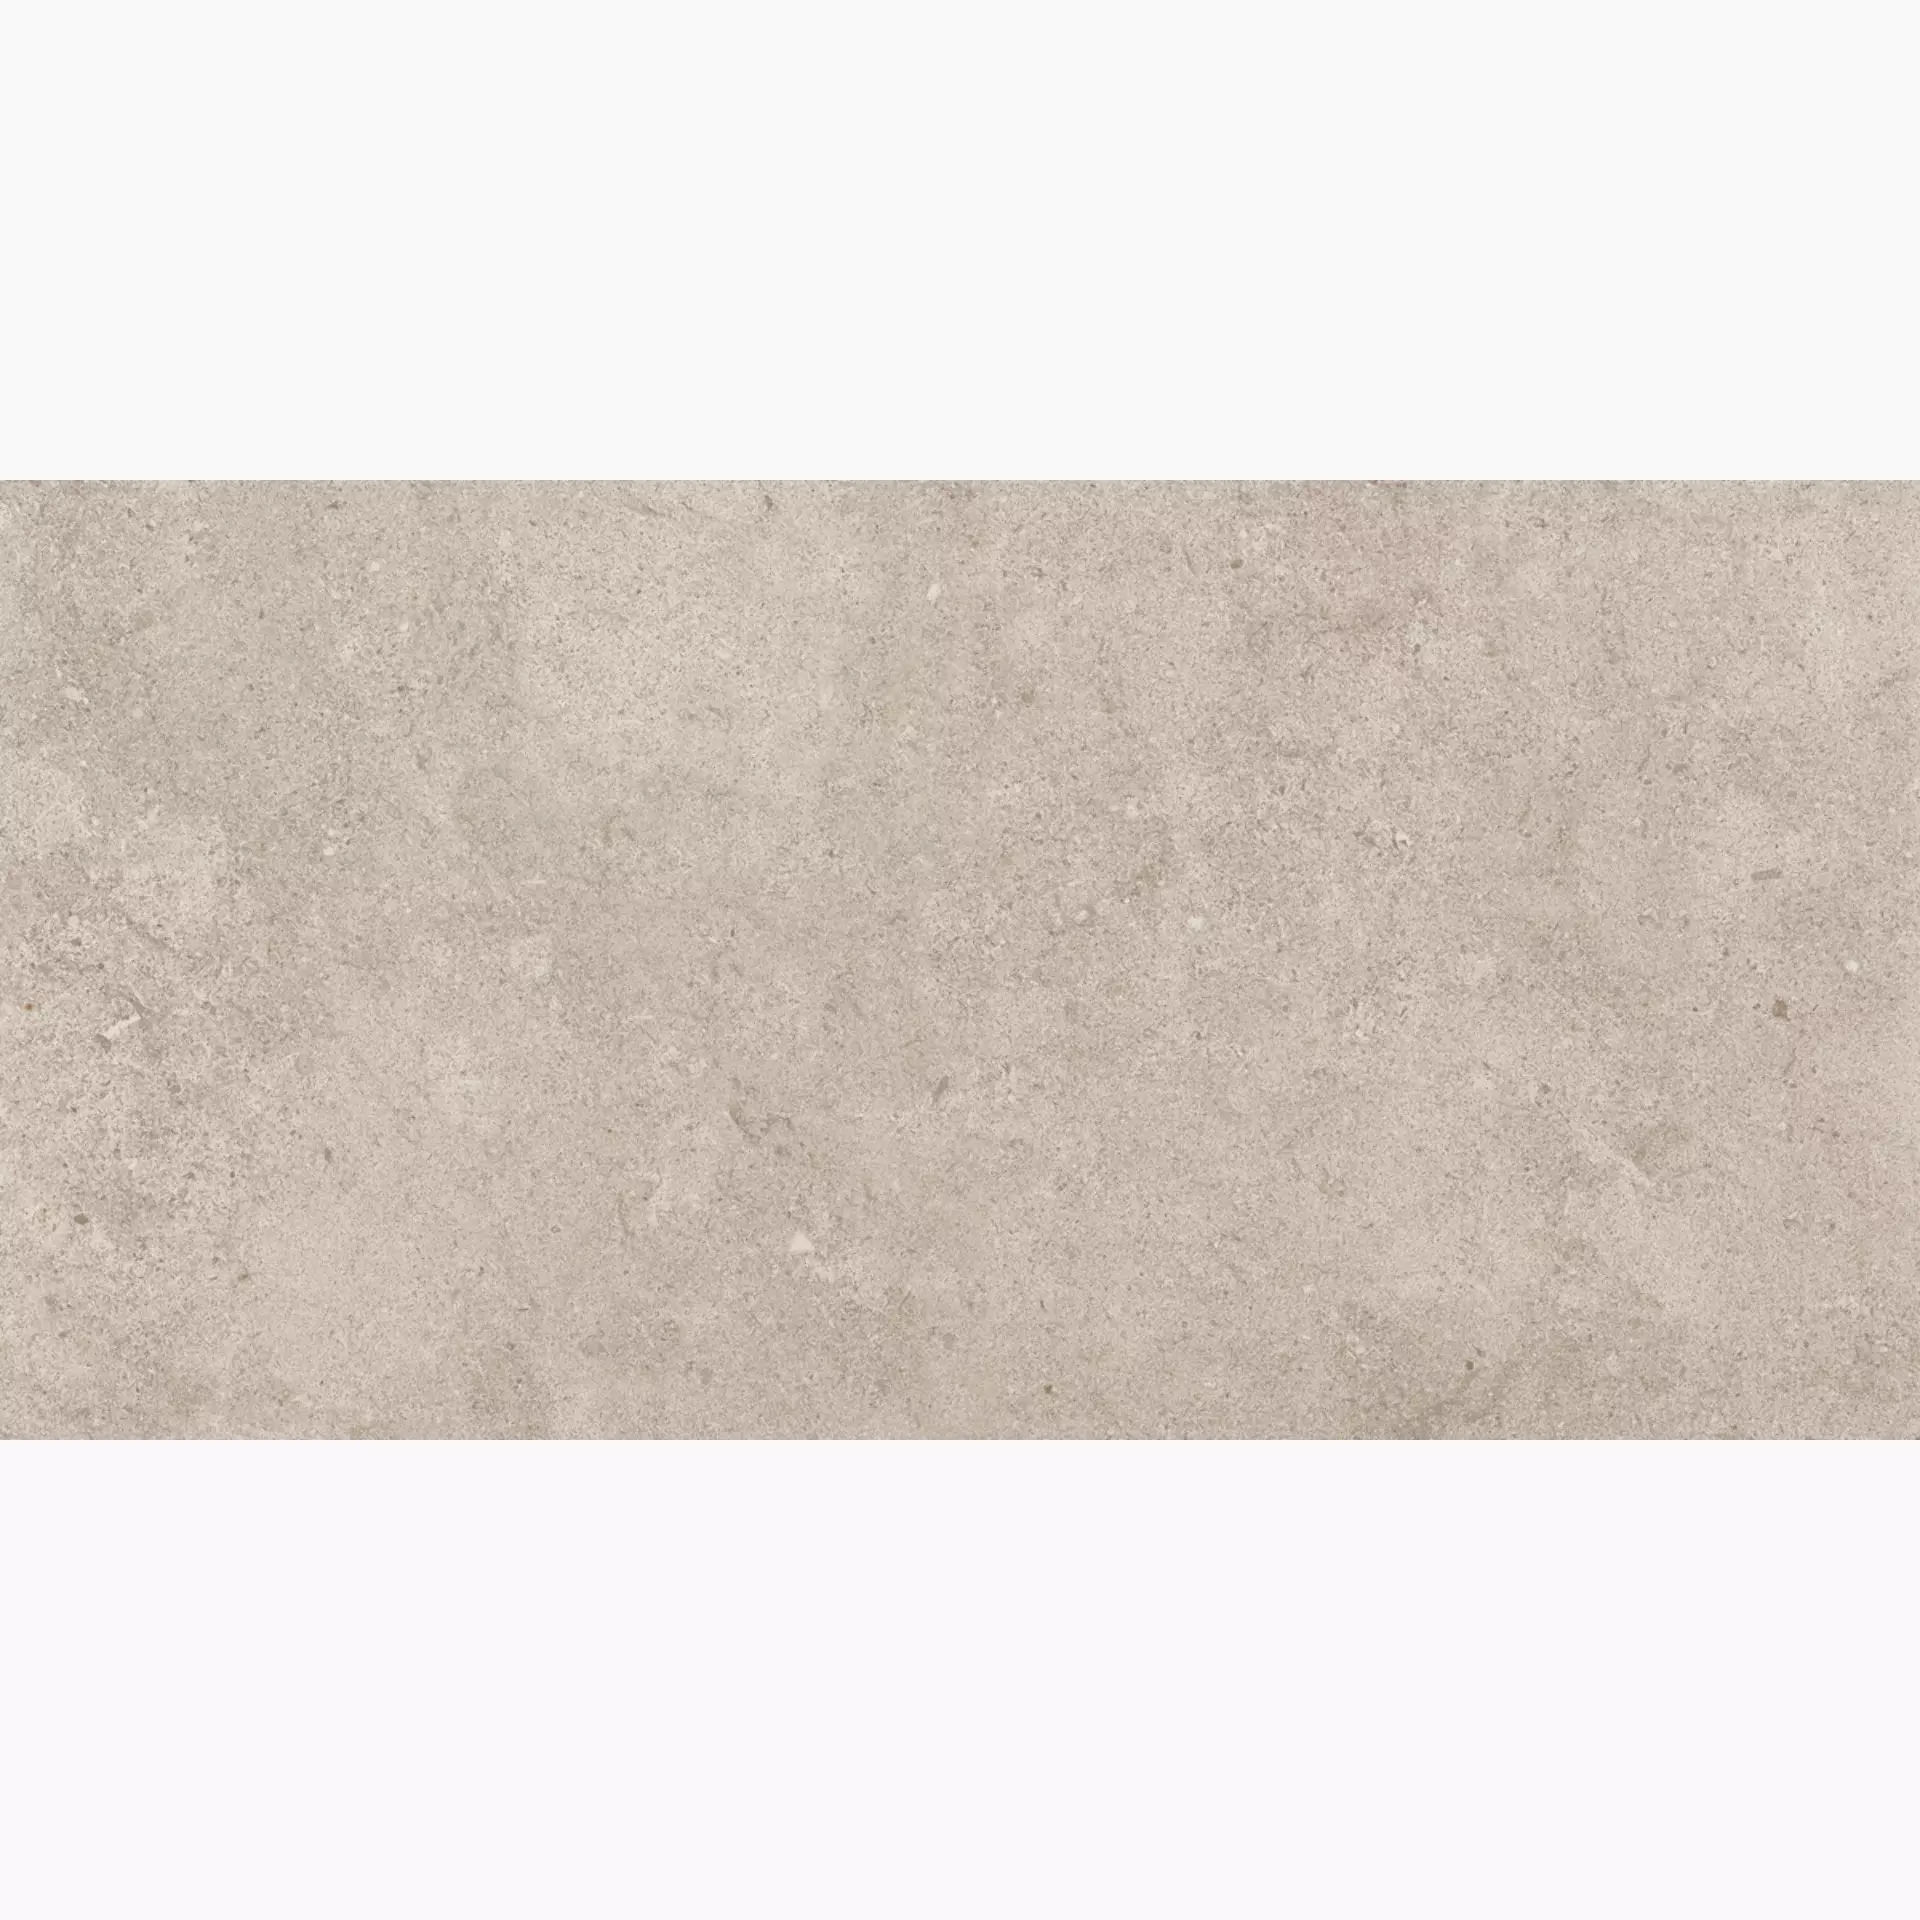 Sant Agostino Highstone Greige Natural CSAHS7GR12 60x120cm rectified 10mm